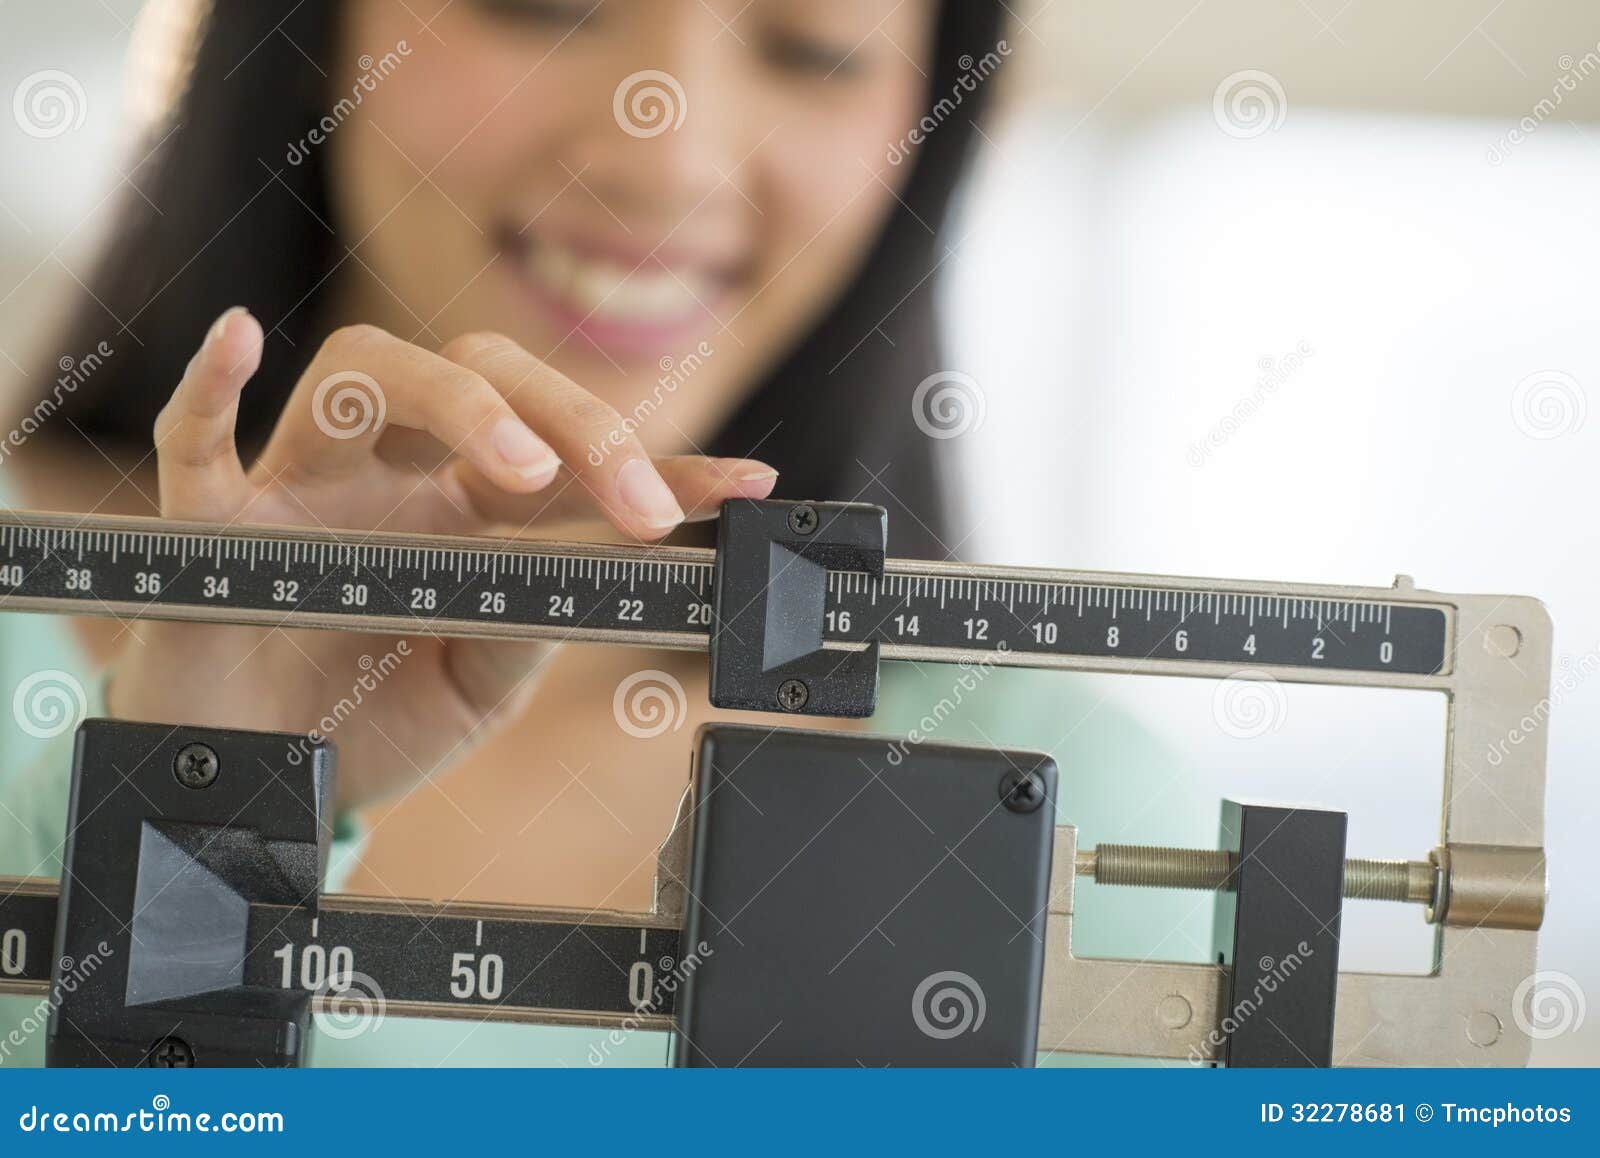 midsection of woman smiling while adjusting weight scale